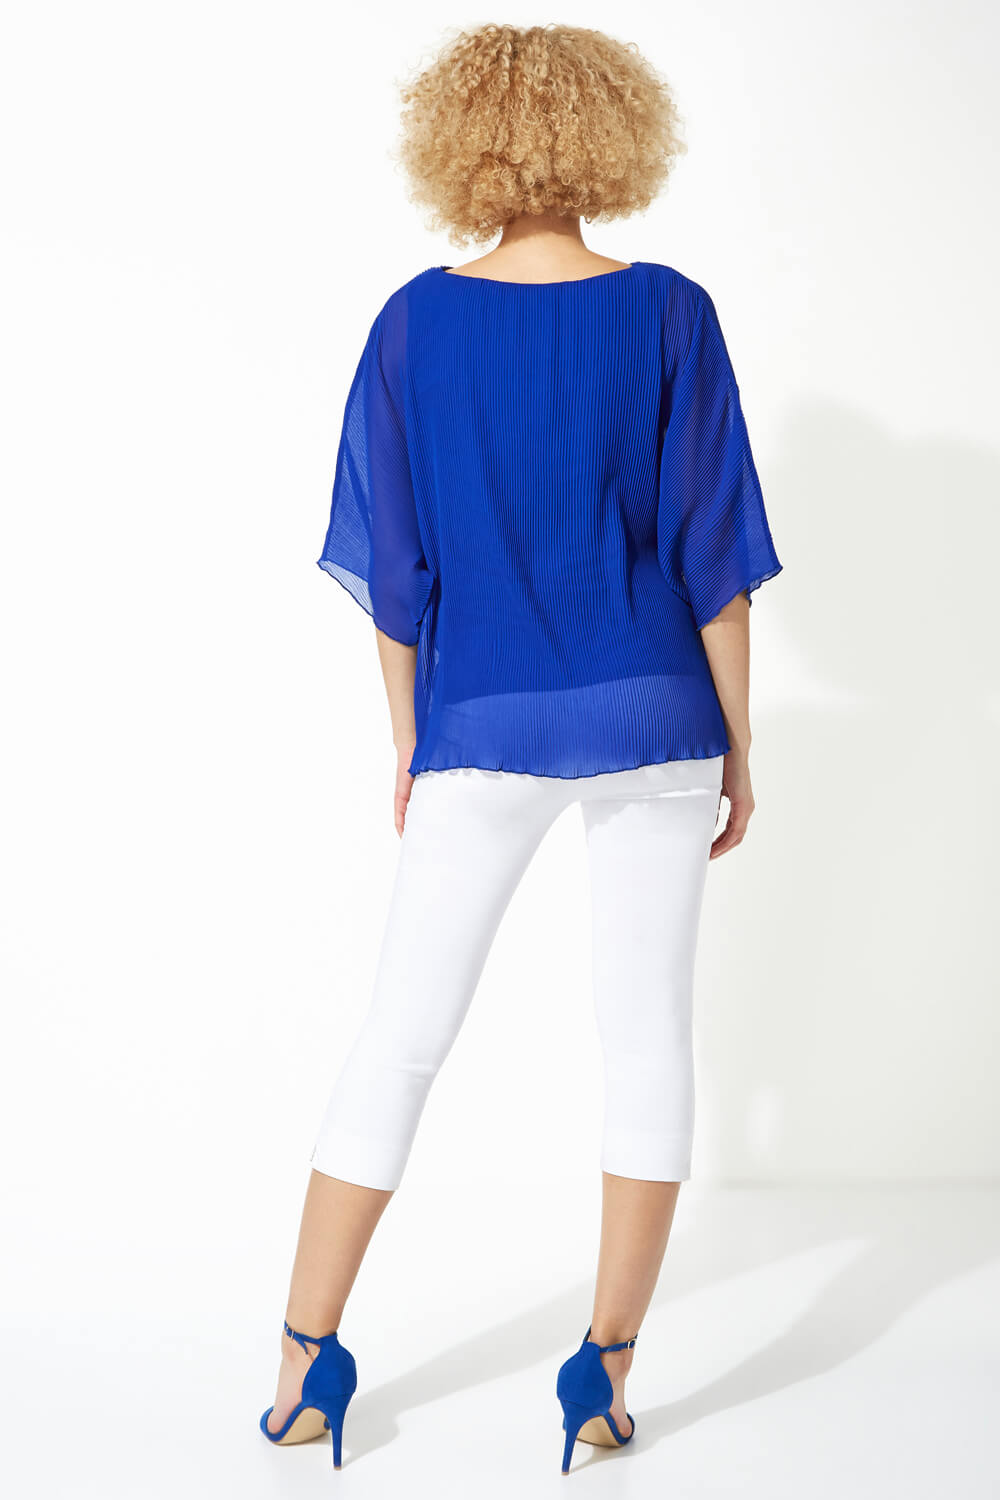 Royal Blue Pleated Chiffon Overlay Top, Image 3 of 8